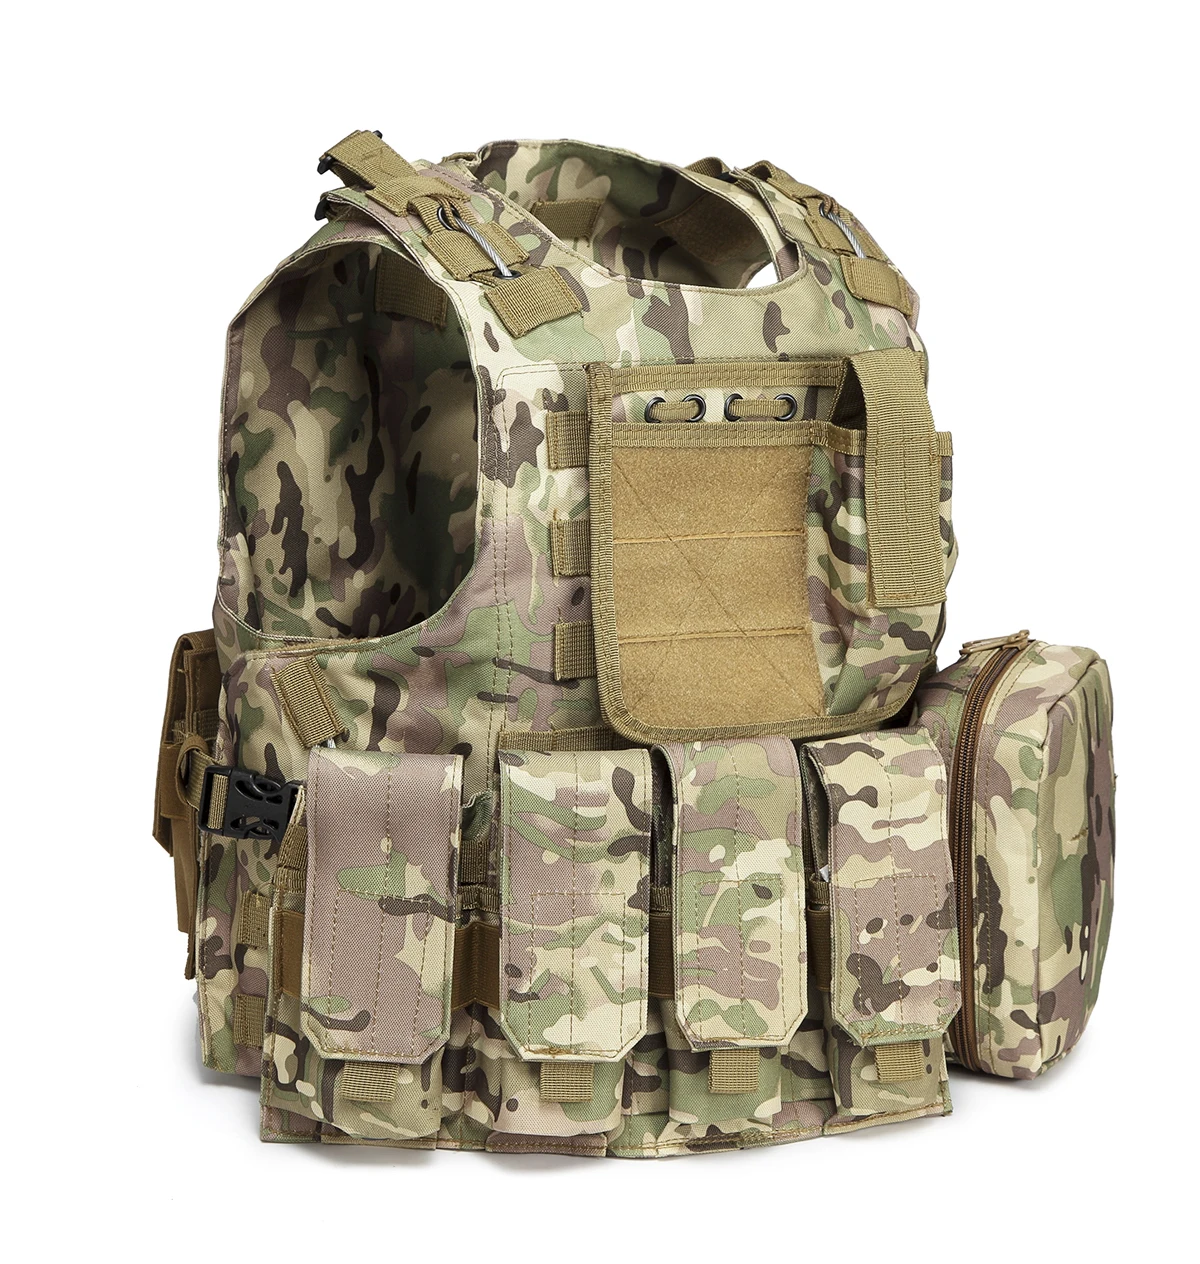 High Quality Cp Multicam Camouflage Tactical Vest With Molle System ...